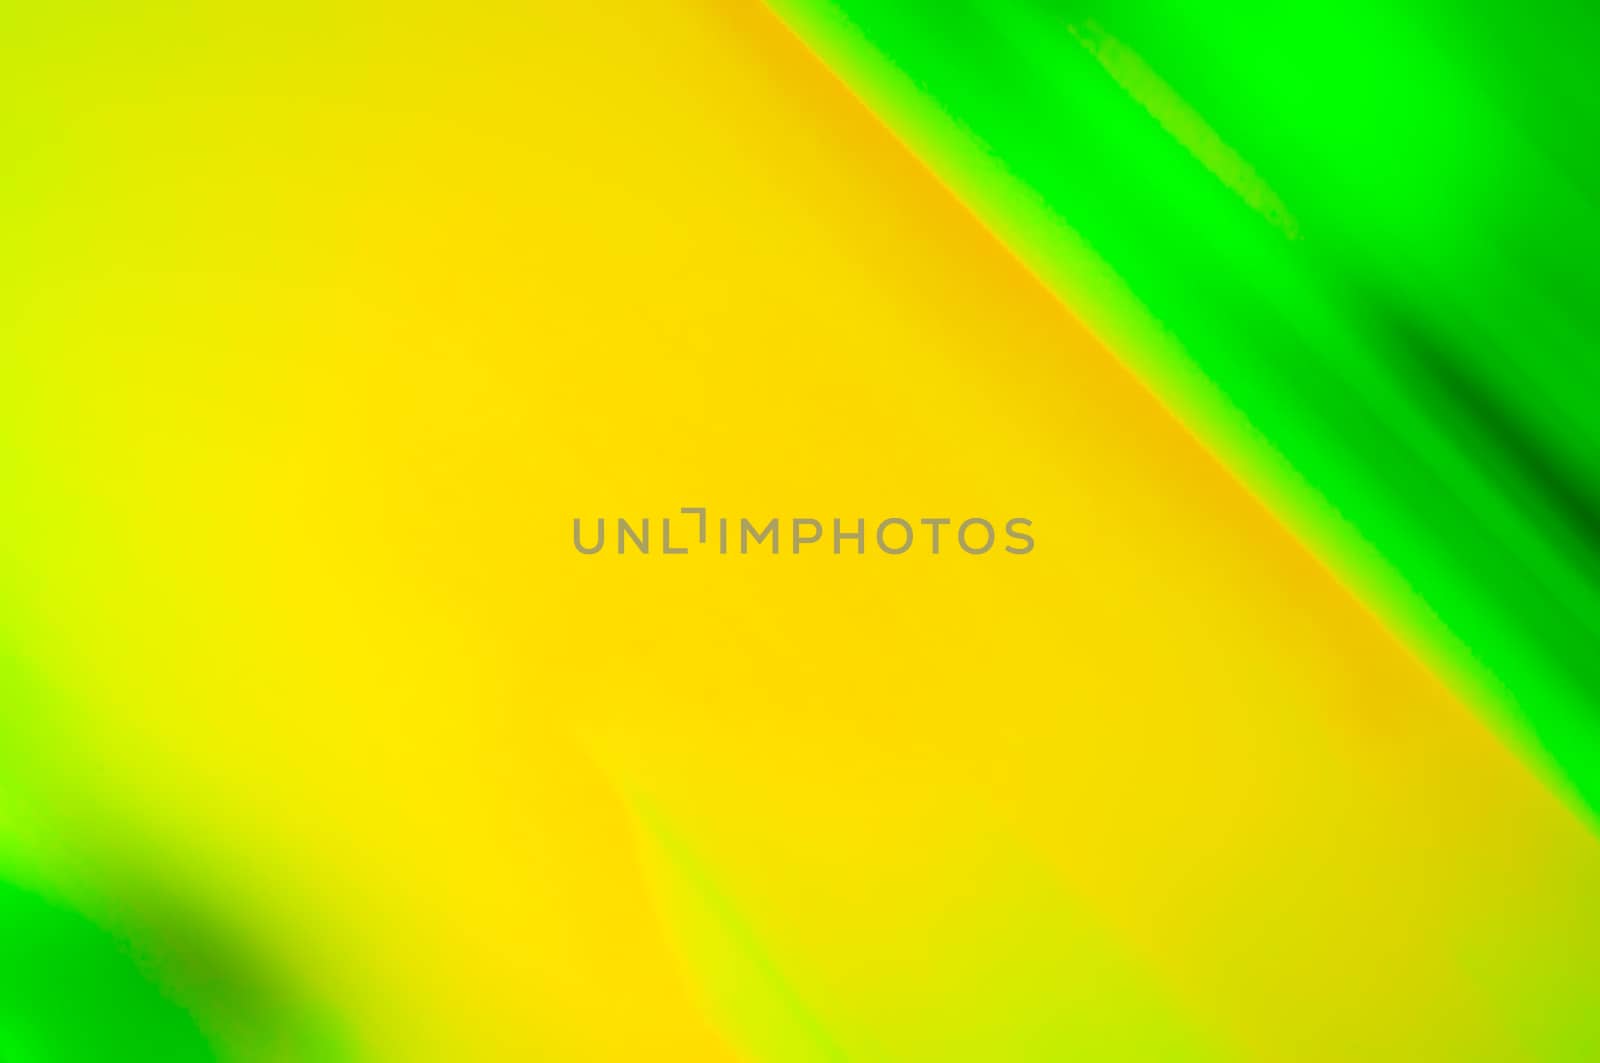 A green and yellow photographic abstract background